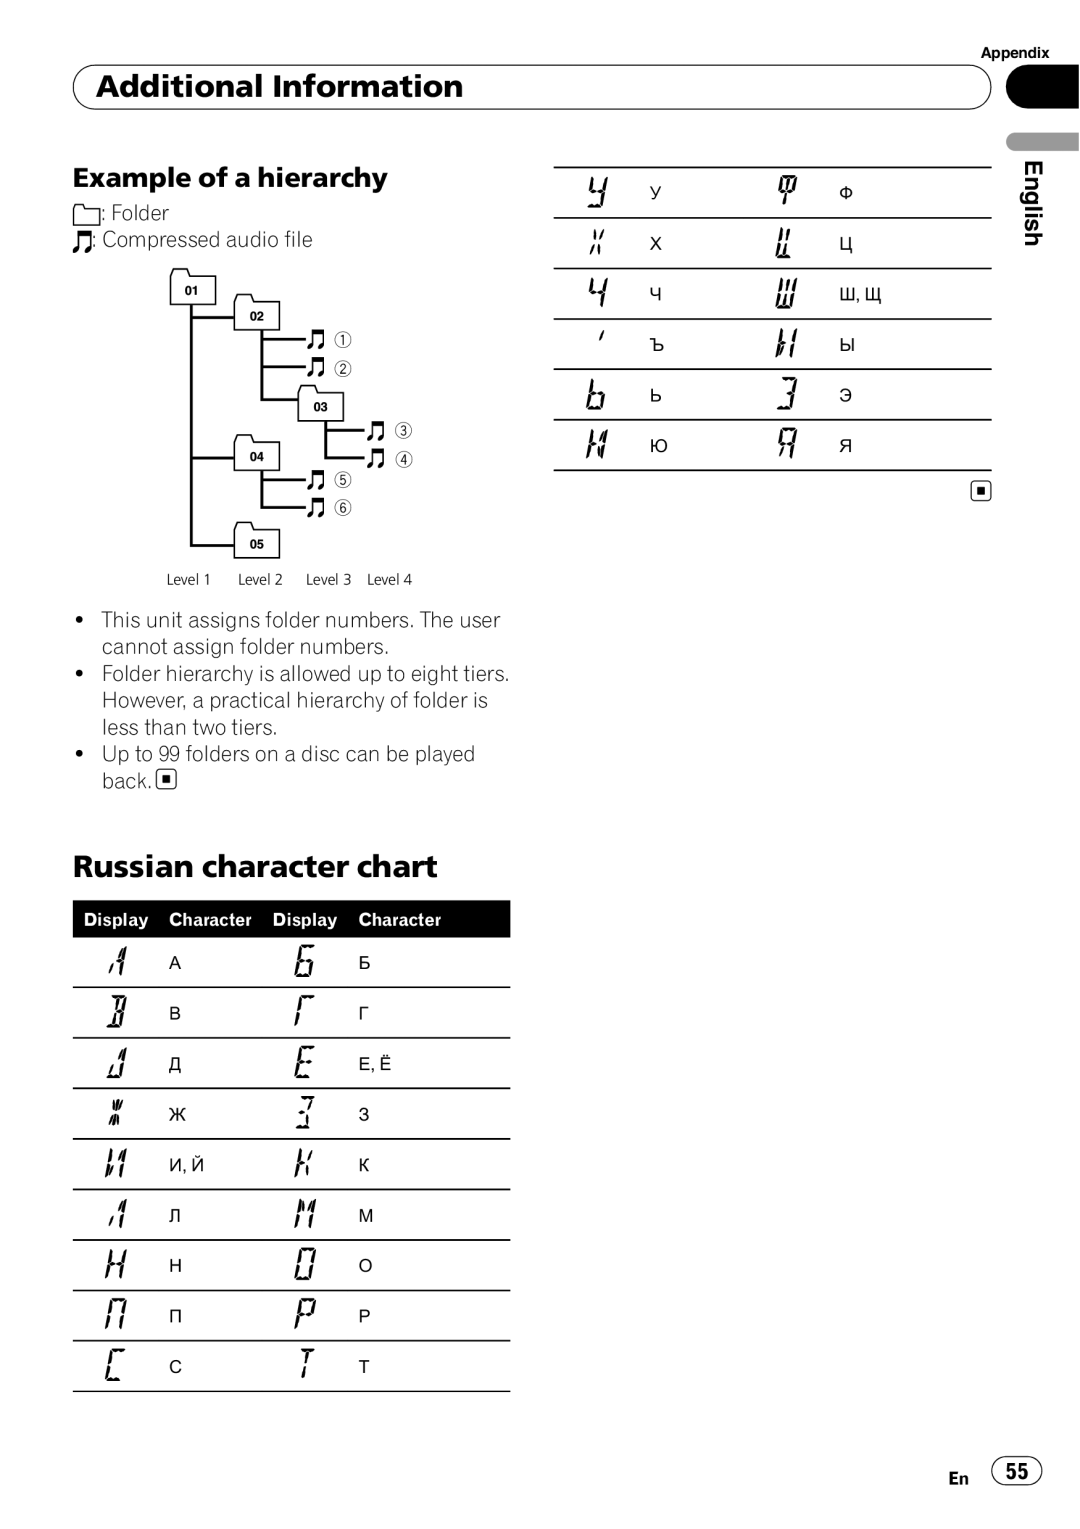 Pioneer DEH-P6000UB operation manual Russian character chart, Example of a hierarchy, Additional Information, English 